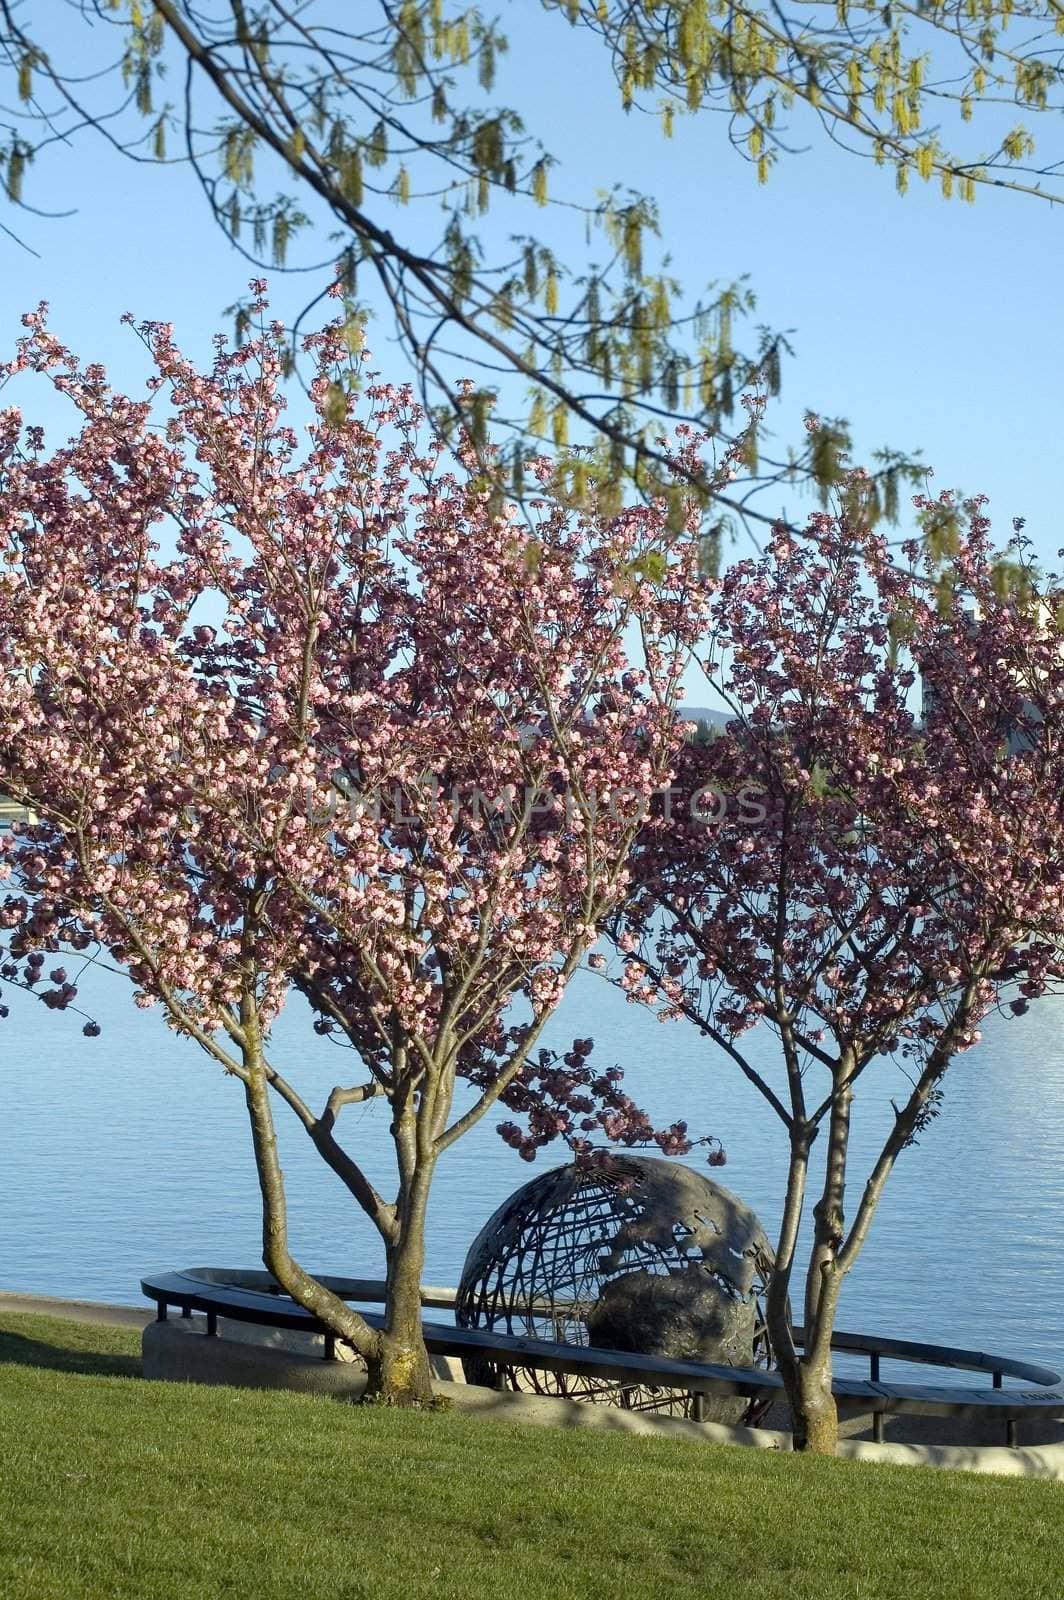 Captain Cook Memorial Globe in Canberra, blooming pink trees, regatta point